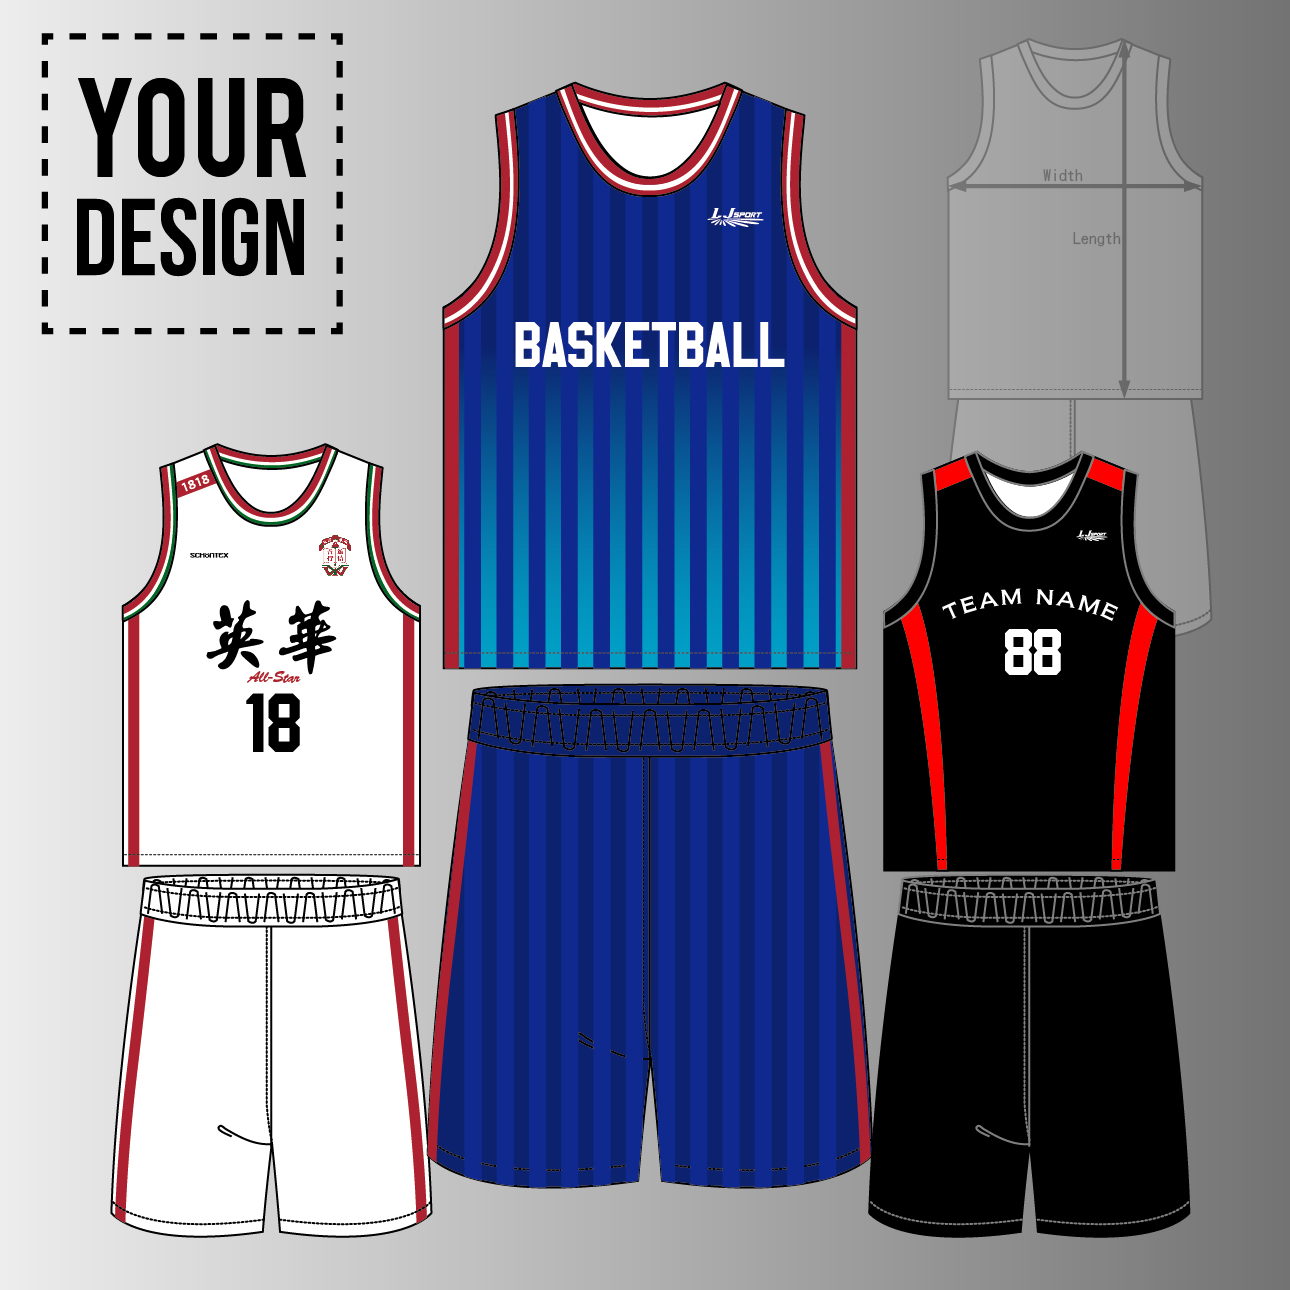 sublimated basketball jersey designs